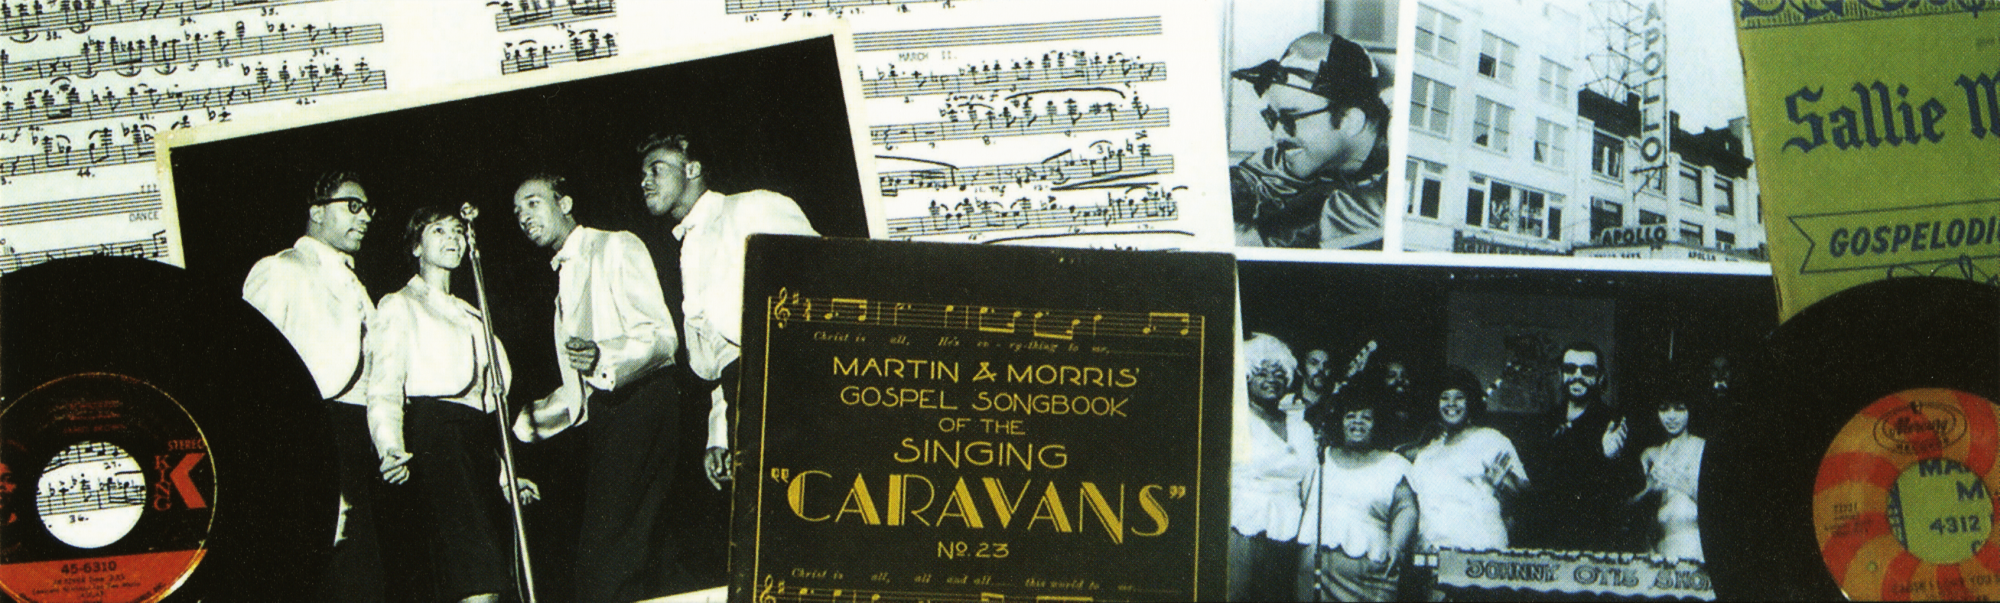 Archives of African American Music and Culture